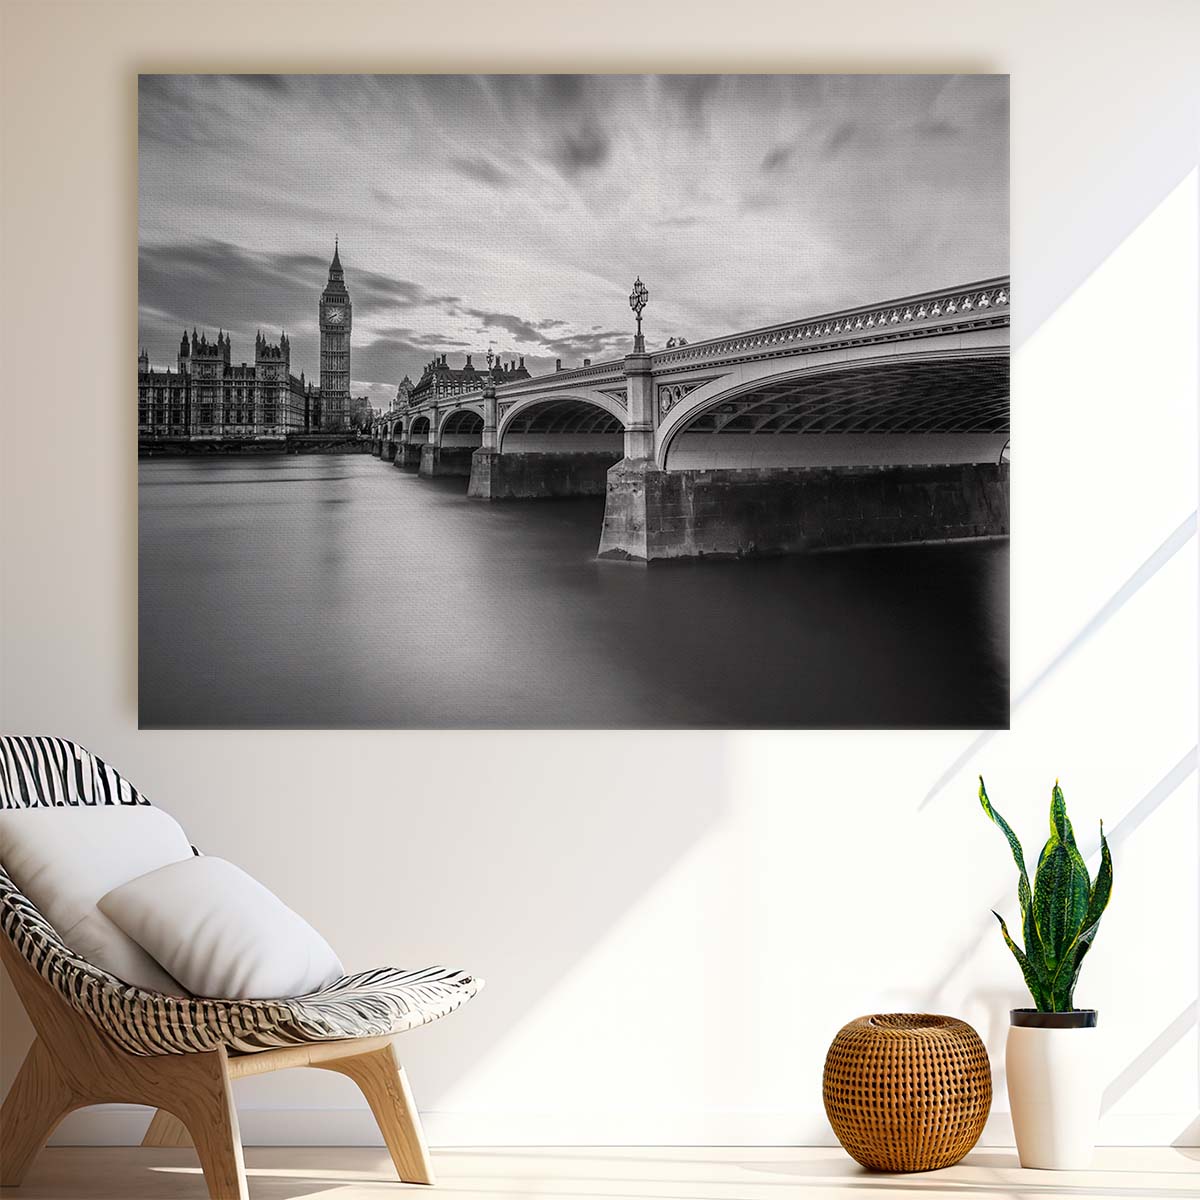 Iconic London Skyline & Big Ben Monochrome Wall Art by Luxuriance Designs. Made in USA.